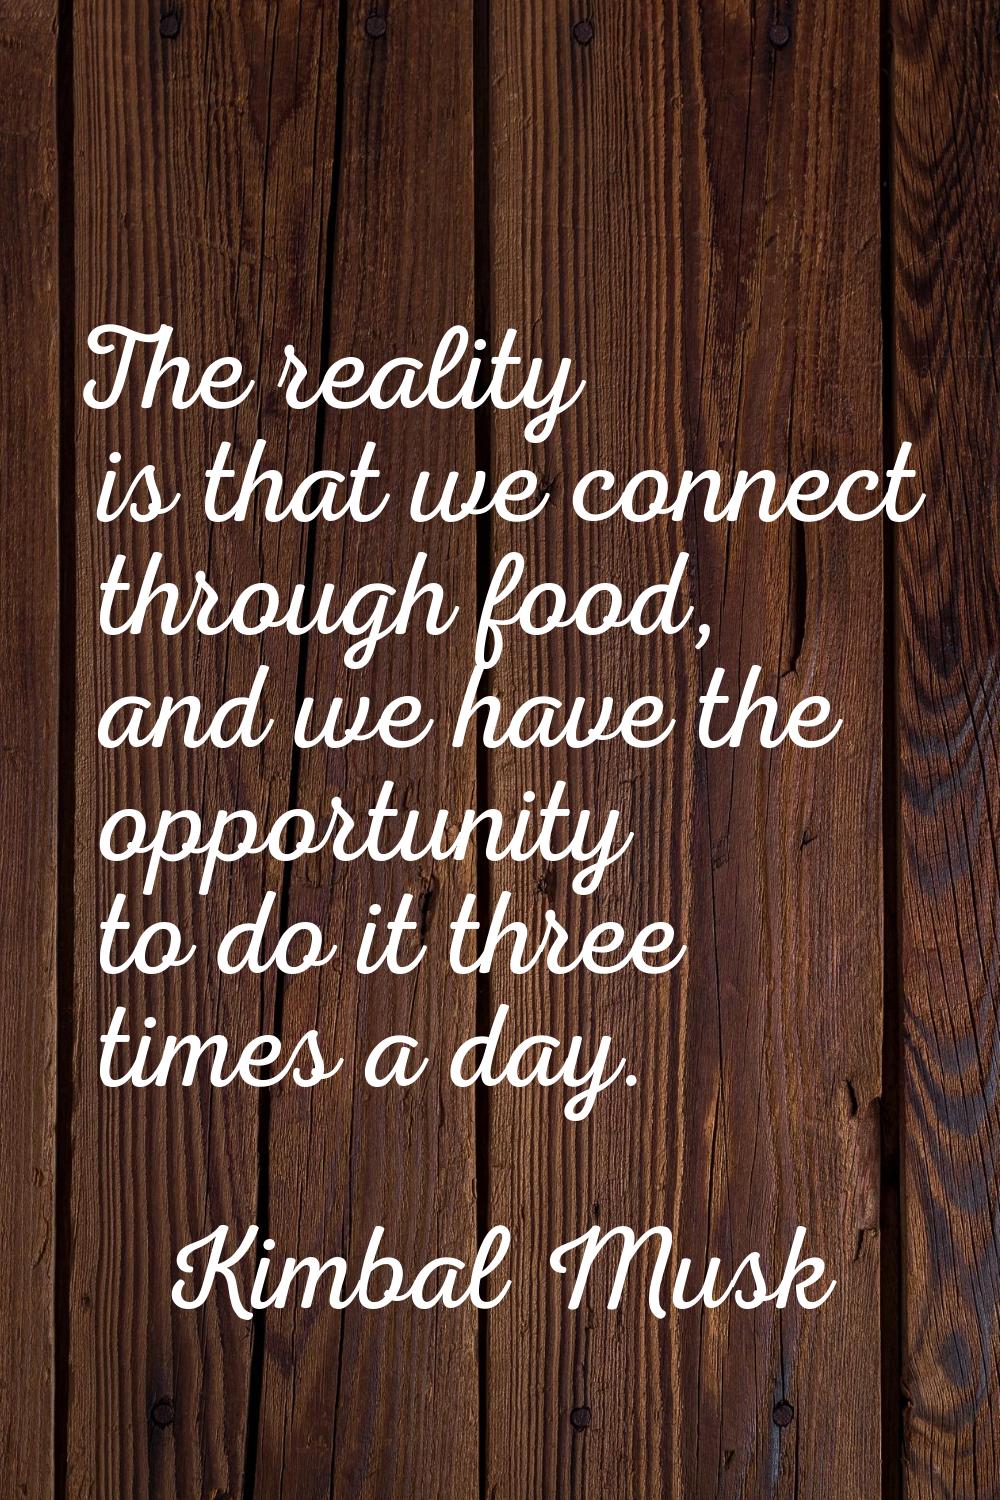 The reality is that we connect through food, and we have the opportunity to do it three times a day